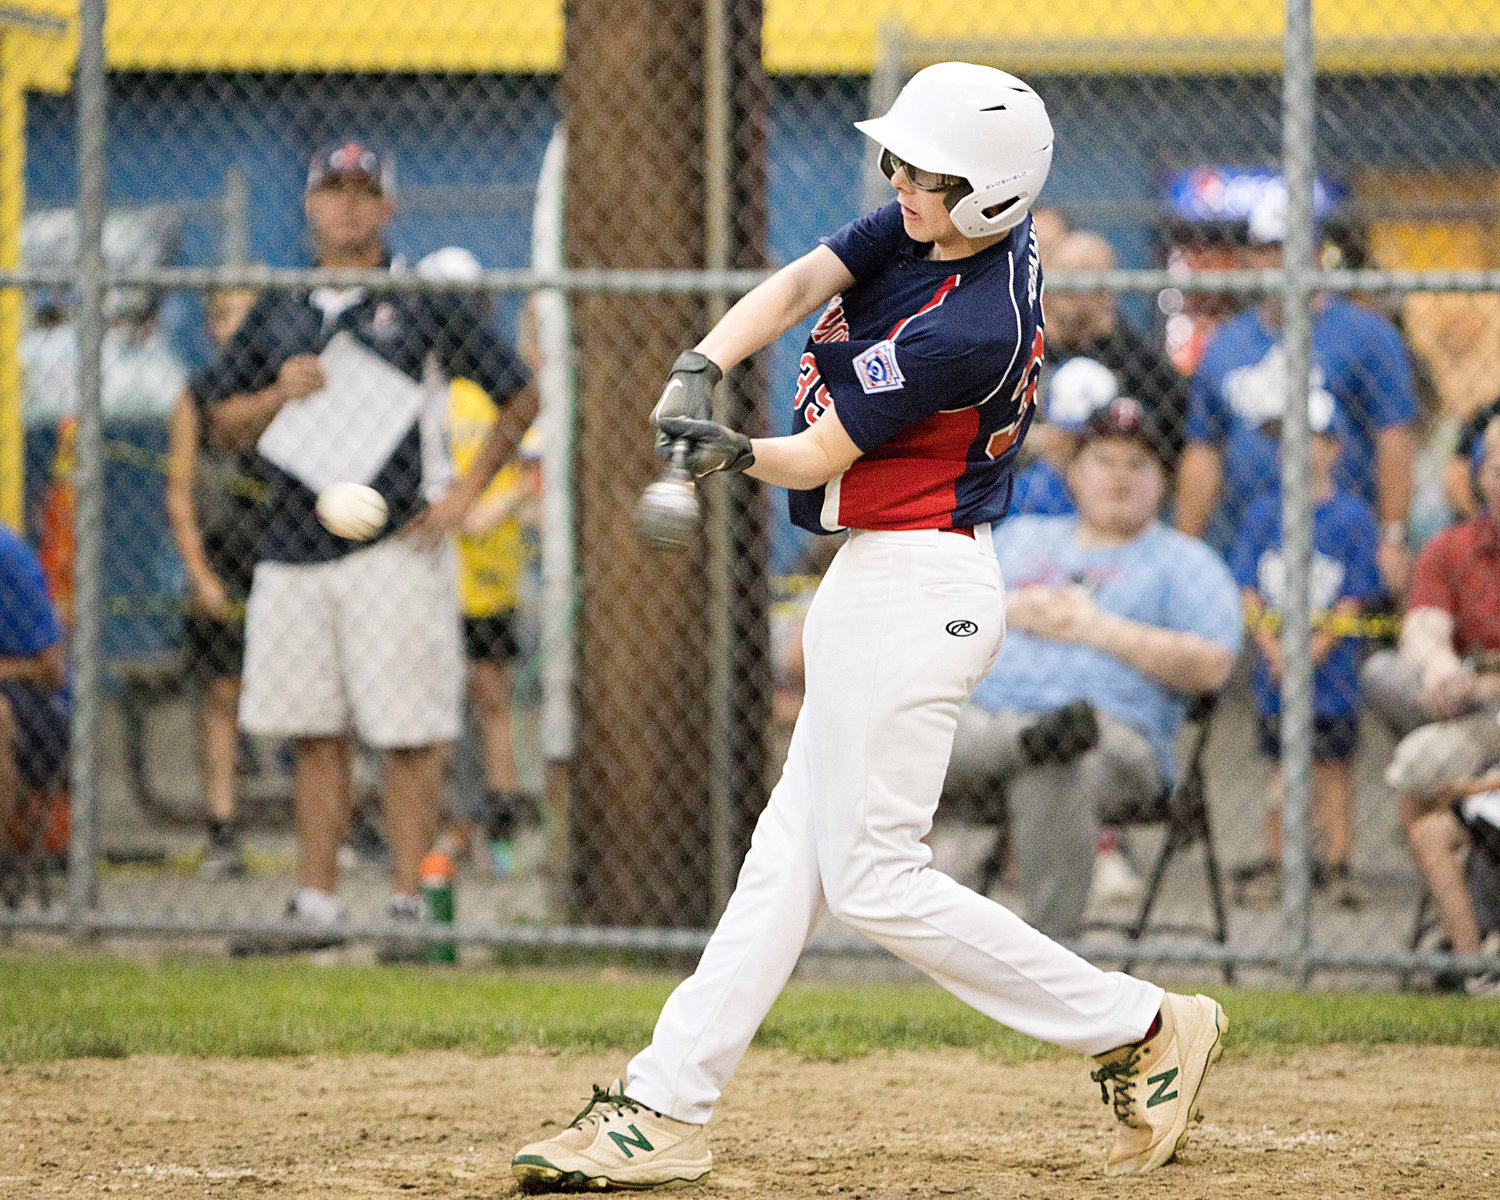 Tyler Boiani sends the ball out of the park, narrowing the score to 4-3 in the sixth inning of the Little League state finals against Cumberland.